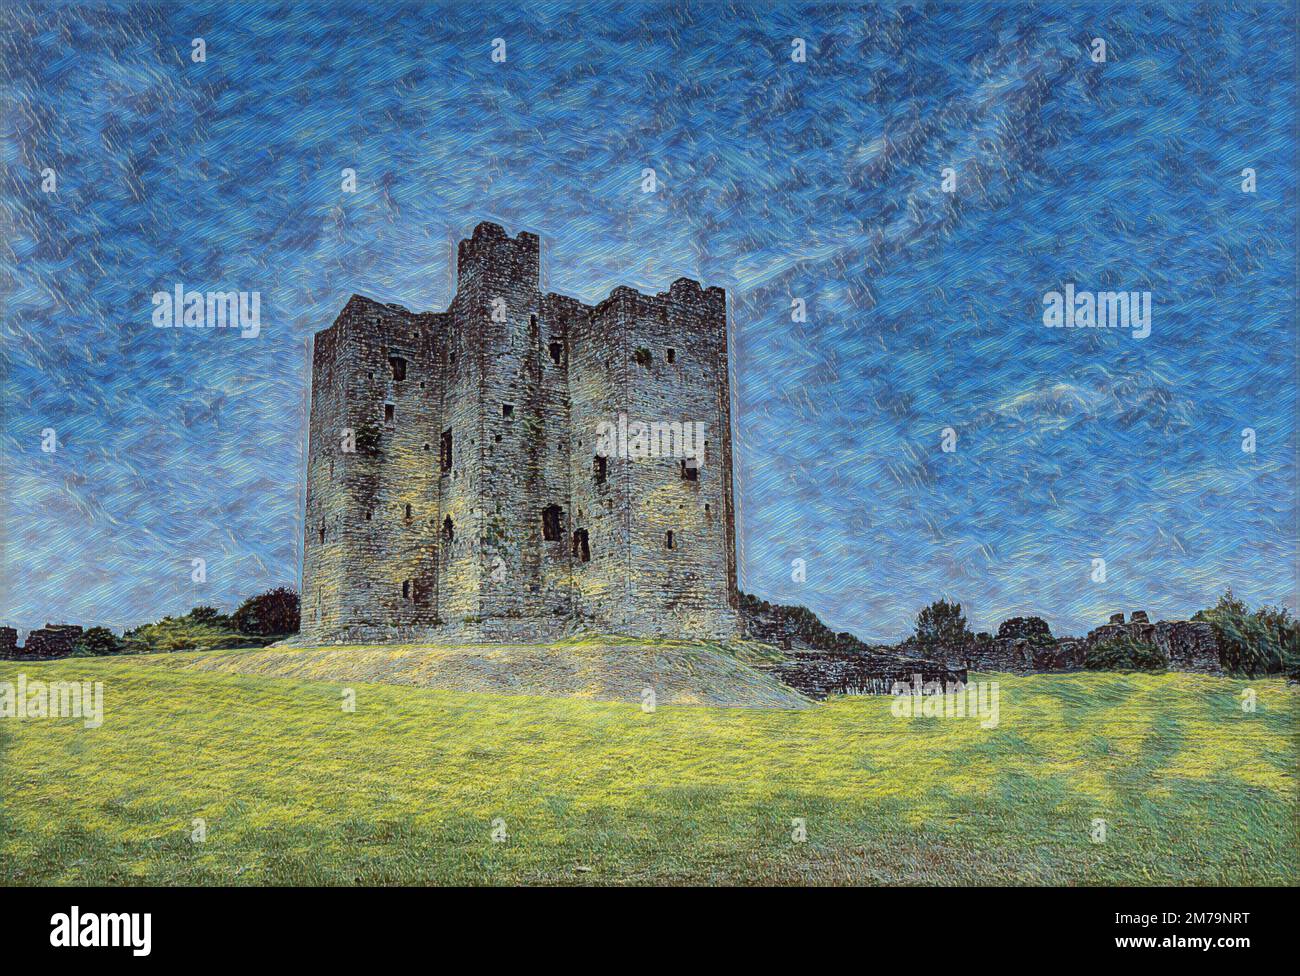 Digital watercolor painting from a photo of ancient mediaeval castle in Ireland surrounded by grassy green fields Stock Photo